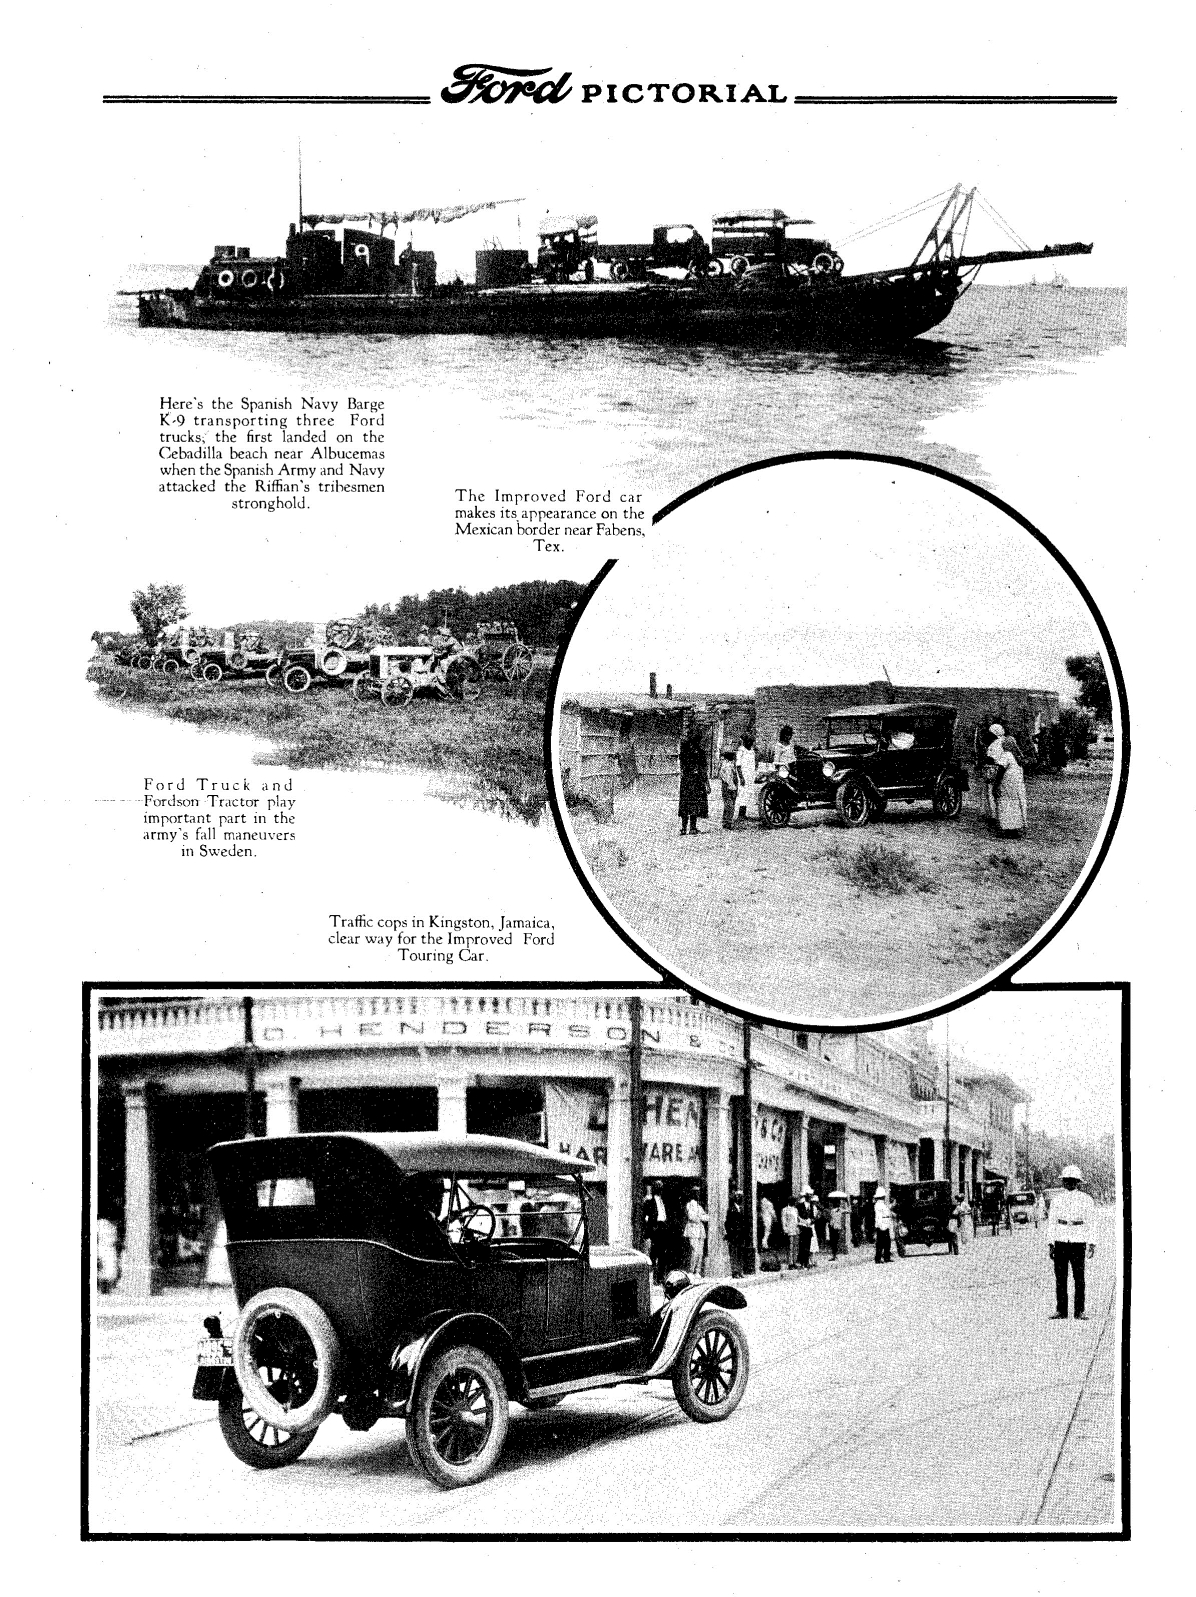 1926_Ford_Pictorial-01-2